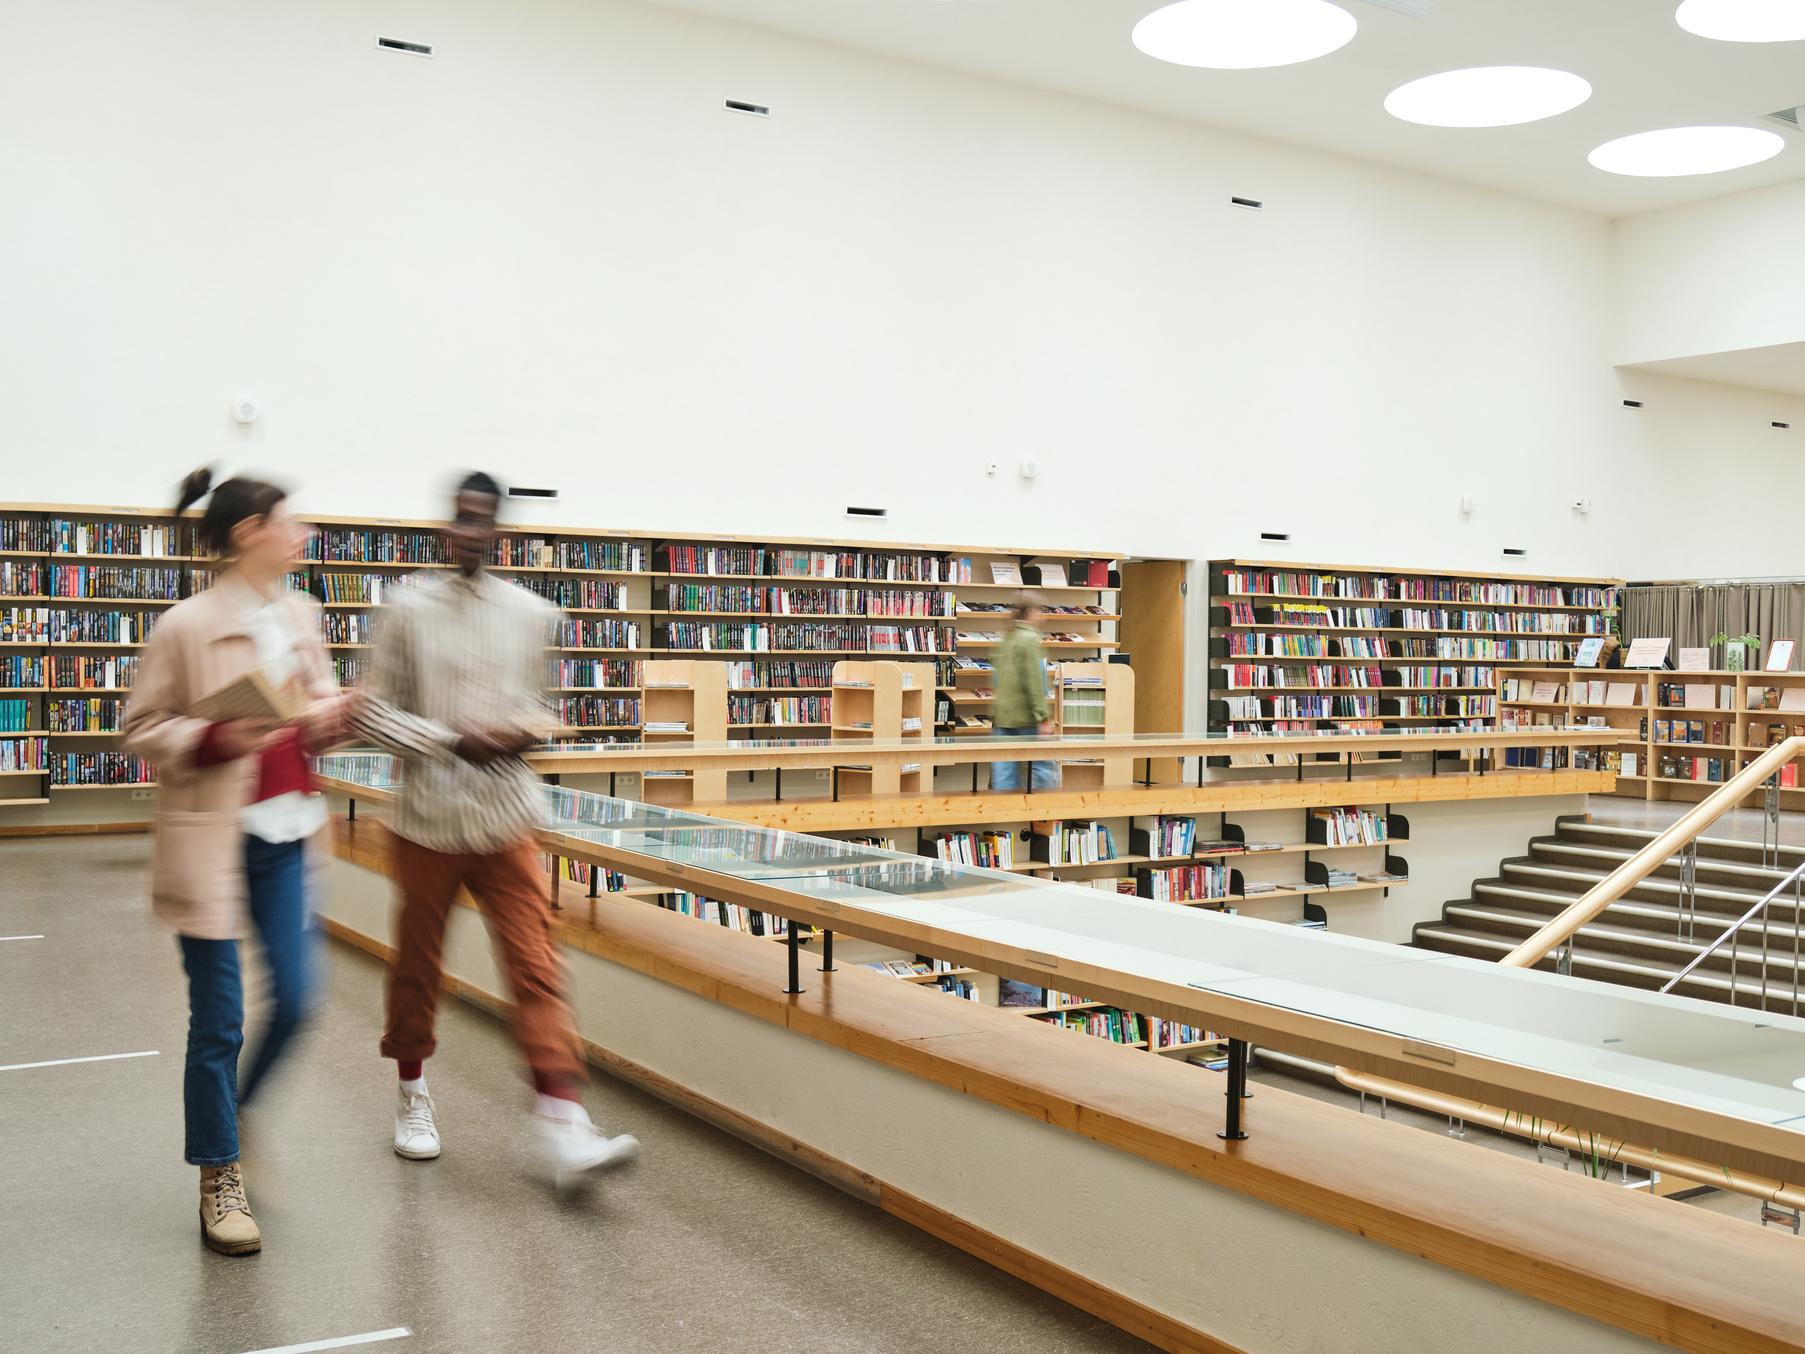 Two students walking in a library